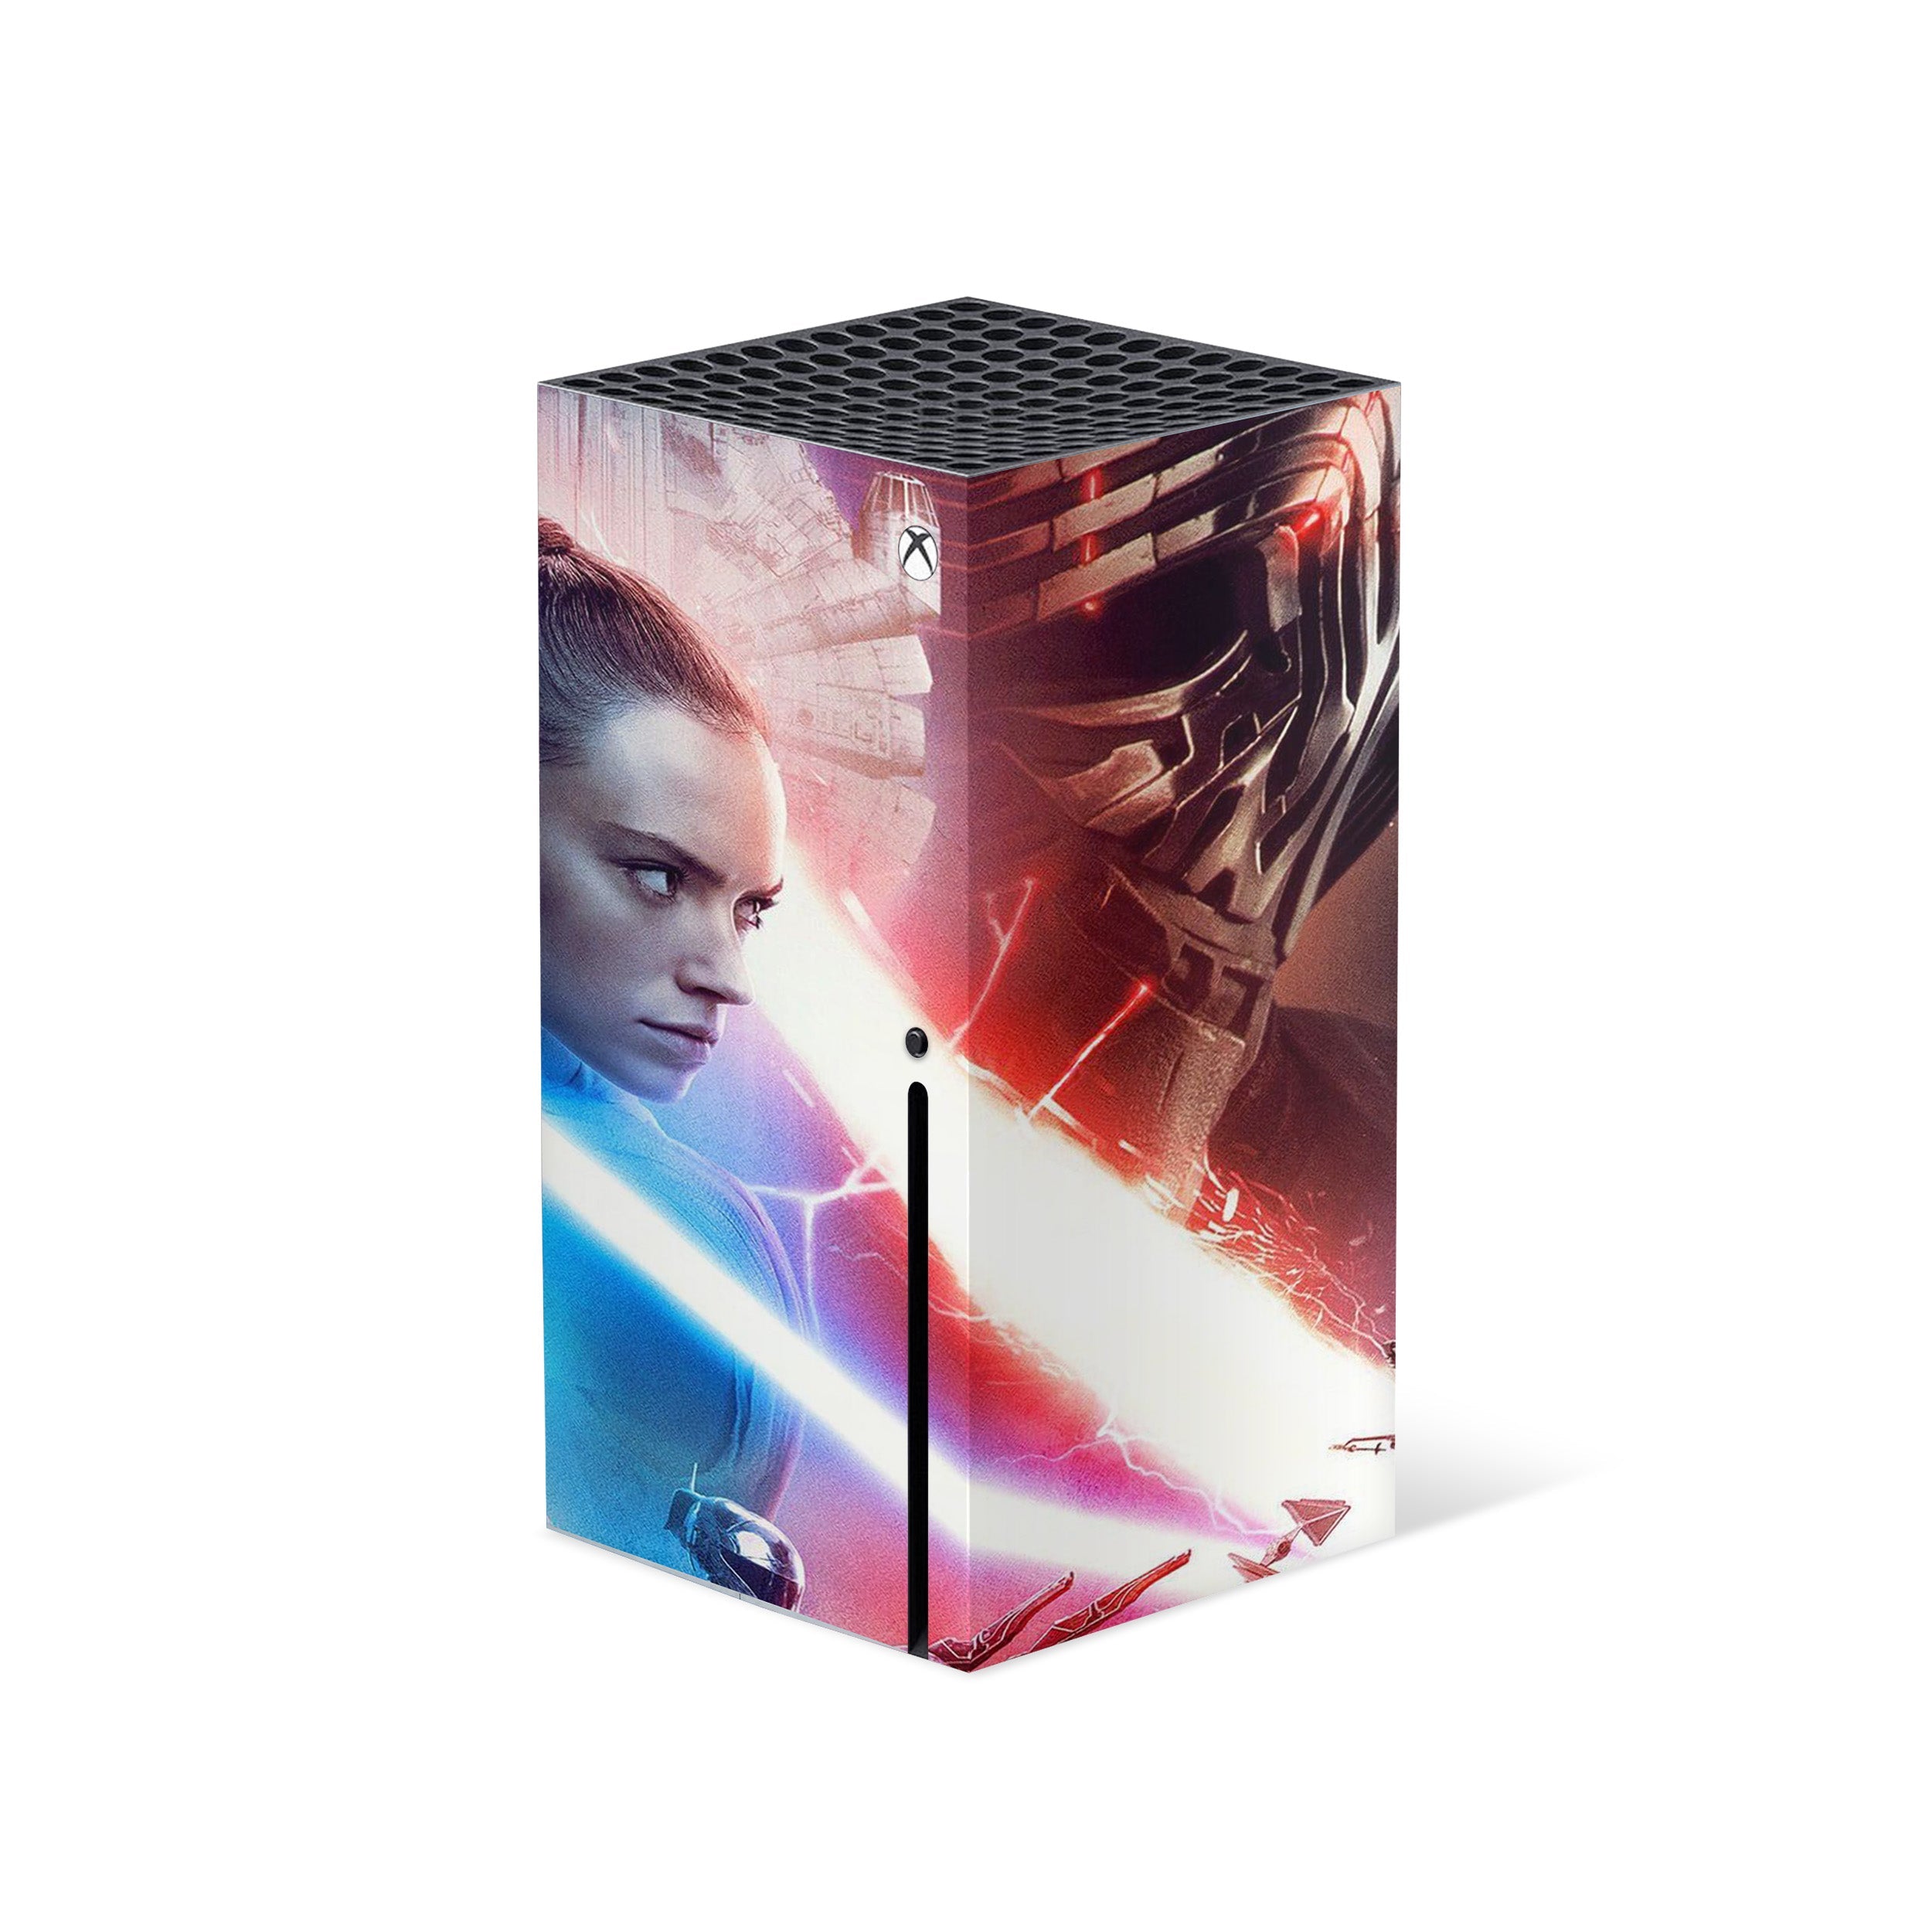 A video game skin featuring a Star Wars The Rise of Skywalker design for the Xbox Series X.